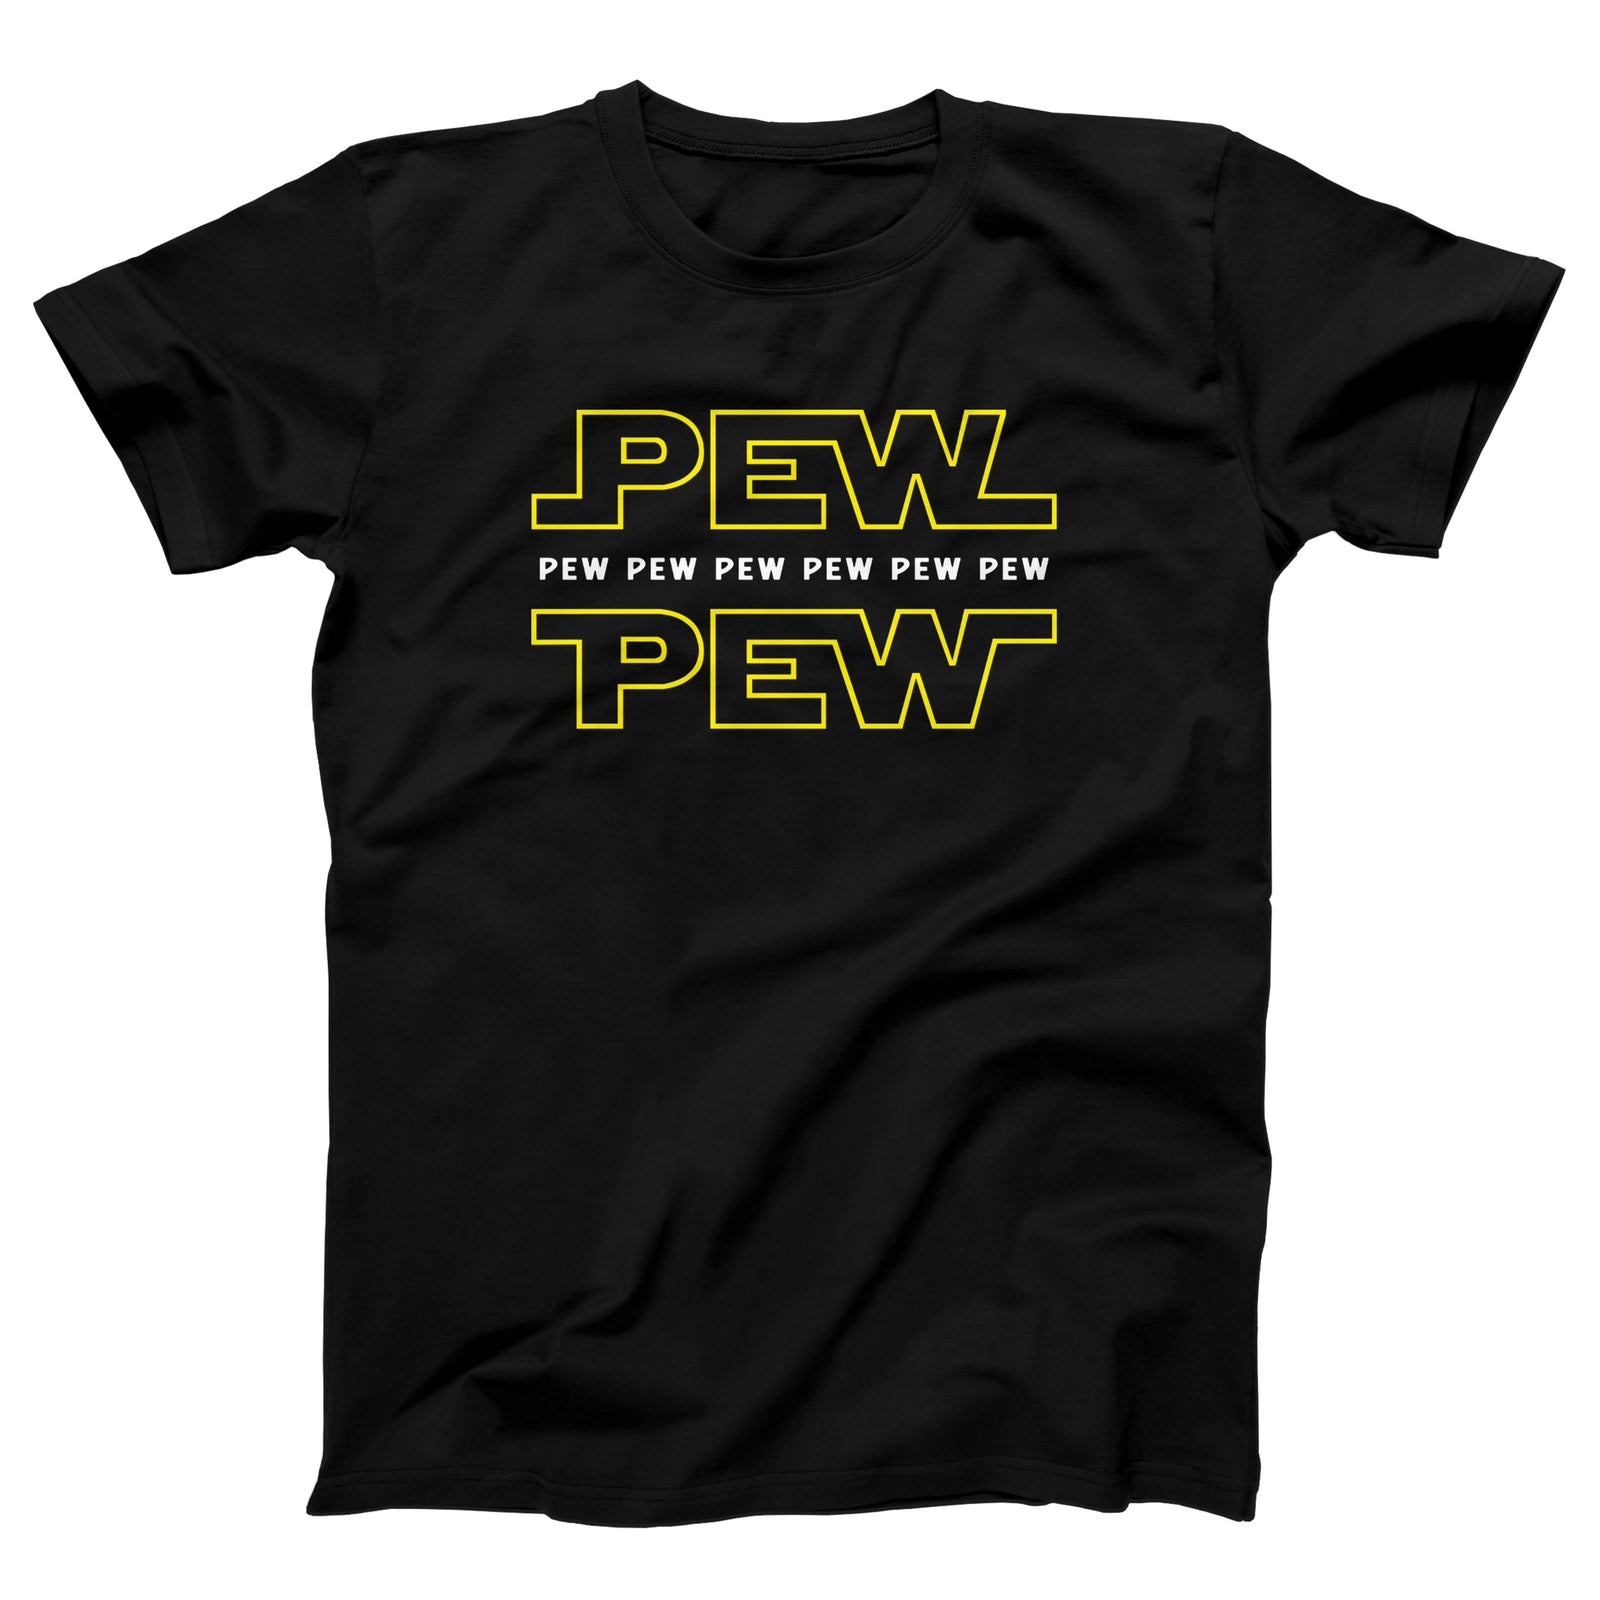 //cdn.shopify.com/s/files/1/0274/2488/2766/products/pew-pew-menunisex-t-shirt-799840_5000x.jpg?v=1625787925 5000w,
    //cdn.shopify.com/s/files/1/0274/2488/2766/products/pew-pew-menunisex-t-shirt-799840_4500x.jpg?v=1625787925 4500w,
    //cdn.shopify.com/s/files/1/0274/2488/2766/products/pew-pew-menunisex-t-shirt-799840_4000x.jpg?v=1625787925 4000w,
    //cdn.shopify.com/s/files/1/0274/2488/2766/products/pew-pew-menunisex-t-shirt-799840_3500x.jpg?v=1625787925 3500w,
    //cdn.shopify.com/s/files/1/0274/2488/2766/products/pew-pew-menunisex-t-shirt-799840_3000x.jpg?v=1625787925 3000w,
    //cdn.shopify.com/s/files/1/0274/2488/2766/products/pew-pew-menunisex-t-shirt-799840_2500x.jpg?v=1625787925 2500w,
    //cdn.shopify.com/s/files/1/0274/2488/2766/products/pew-pew-menunisex-t-shirt-799840_2000x.jpg?v=1625787925 2000w,
    //cdn.shopify.com/s/files/1/0274/2488/2766/products/pew-pew-menunisex-t-shirt-799840_1800x.jpg?v=1625787925 1800w,
    //cdn.shopify.com/s/files/1/0274/2488/2766/products/pew-pew-menunisex-t-shirt-799840_1600x.jpg?v=1625787925 1600w,
    //cdn.shopify.com/s/files/1/0274/2488/2766/products/pew-pew-menunisex-t-shirt-799840_1400x.jpg?v=1625787925 1400w,
    //cdn.shopify.com/s/files/1/0274/2488/2766/products/pew-pew-menunisex-t-shirt-799840_1200x.jpg?v=1625787925 1200w,
    //cdn.shopify.com/s/files/1/0274/2488/2766/products/pew-pew-menunisex-t-shirt-799840_1000x.jpg?v=1625787925 1000w,
    //cdn.shopify.com/s/files/1/0274/2488/2766/products/pew-pew-menunisex-t-shirt-799840_800x.jpg?v=1625787925 800w,
    //cdn.shopify.com/s/files/1/0274/2488/2766/products/pew-pew-menunisex-t-shirt-799840_600x.jpg?v=1625787925 600w,
    //cdn.shopify.com/s/files/1/0274/2488/2766/products/pew-pew-menunisex-t-shirt-799840_400x.jpg?v=1625787925 400w,
    //cdn.shopify.com/s/files/1/0274/2488/2766/products/pew-pew-menunisex-t-shirt-799840_200x.jpg?v=1625787925 200w